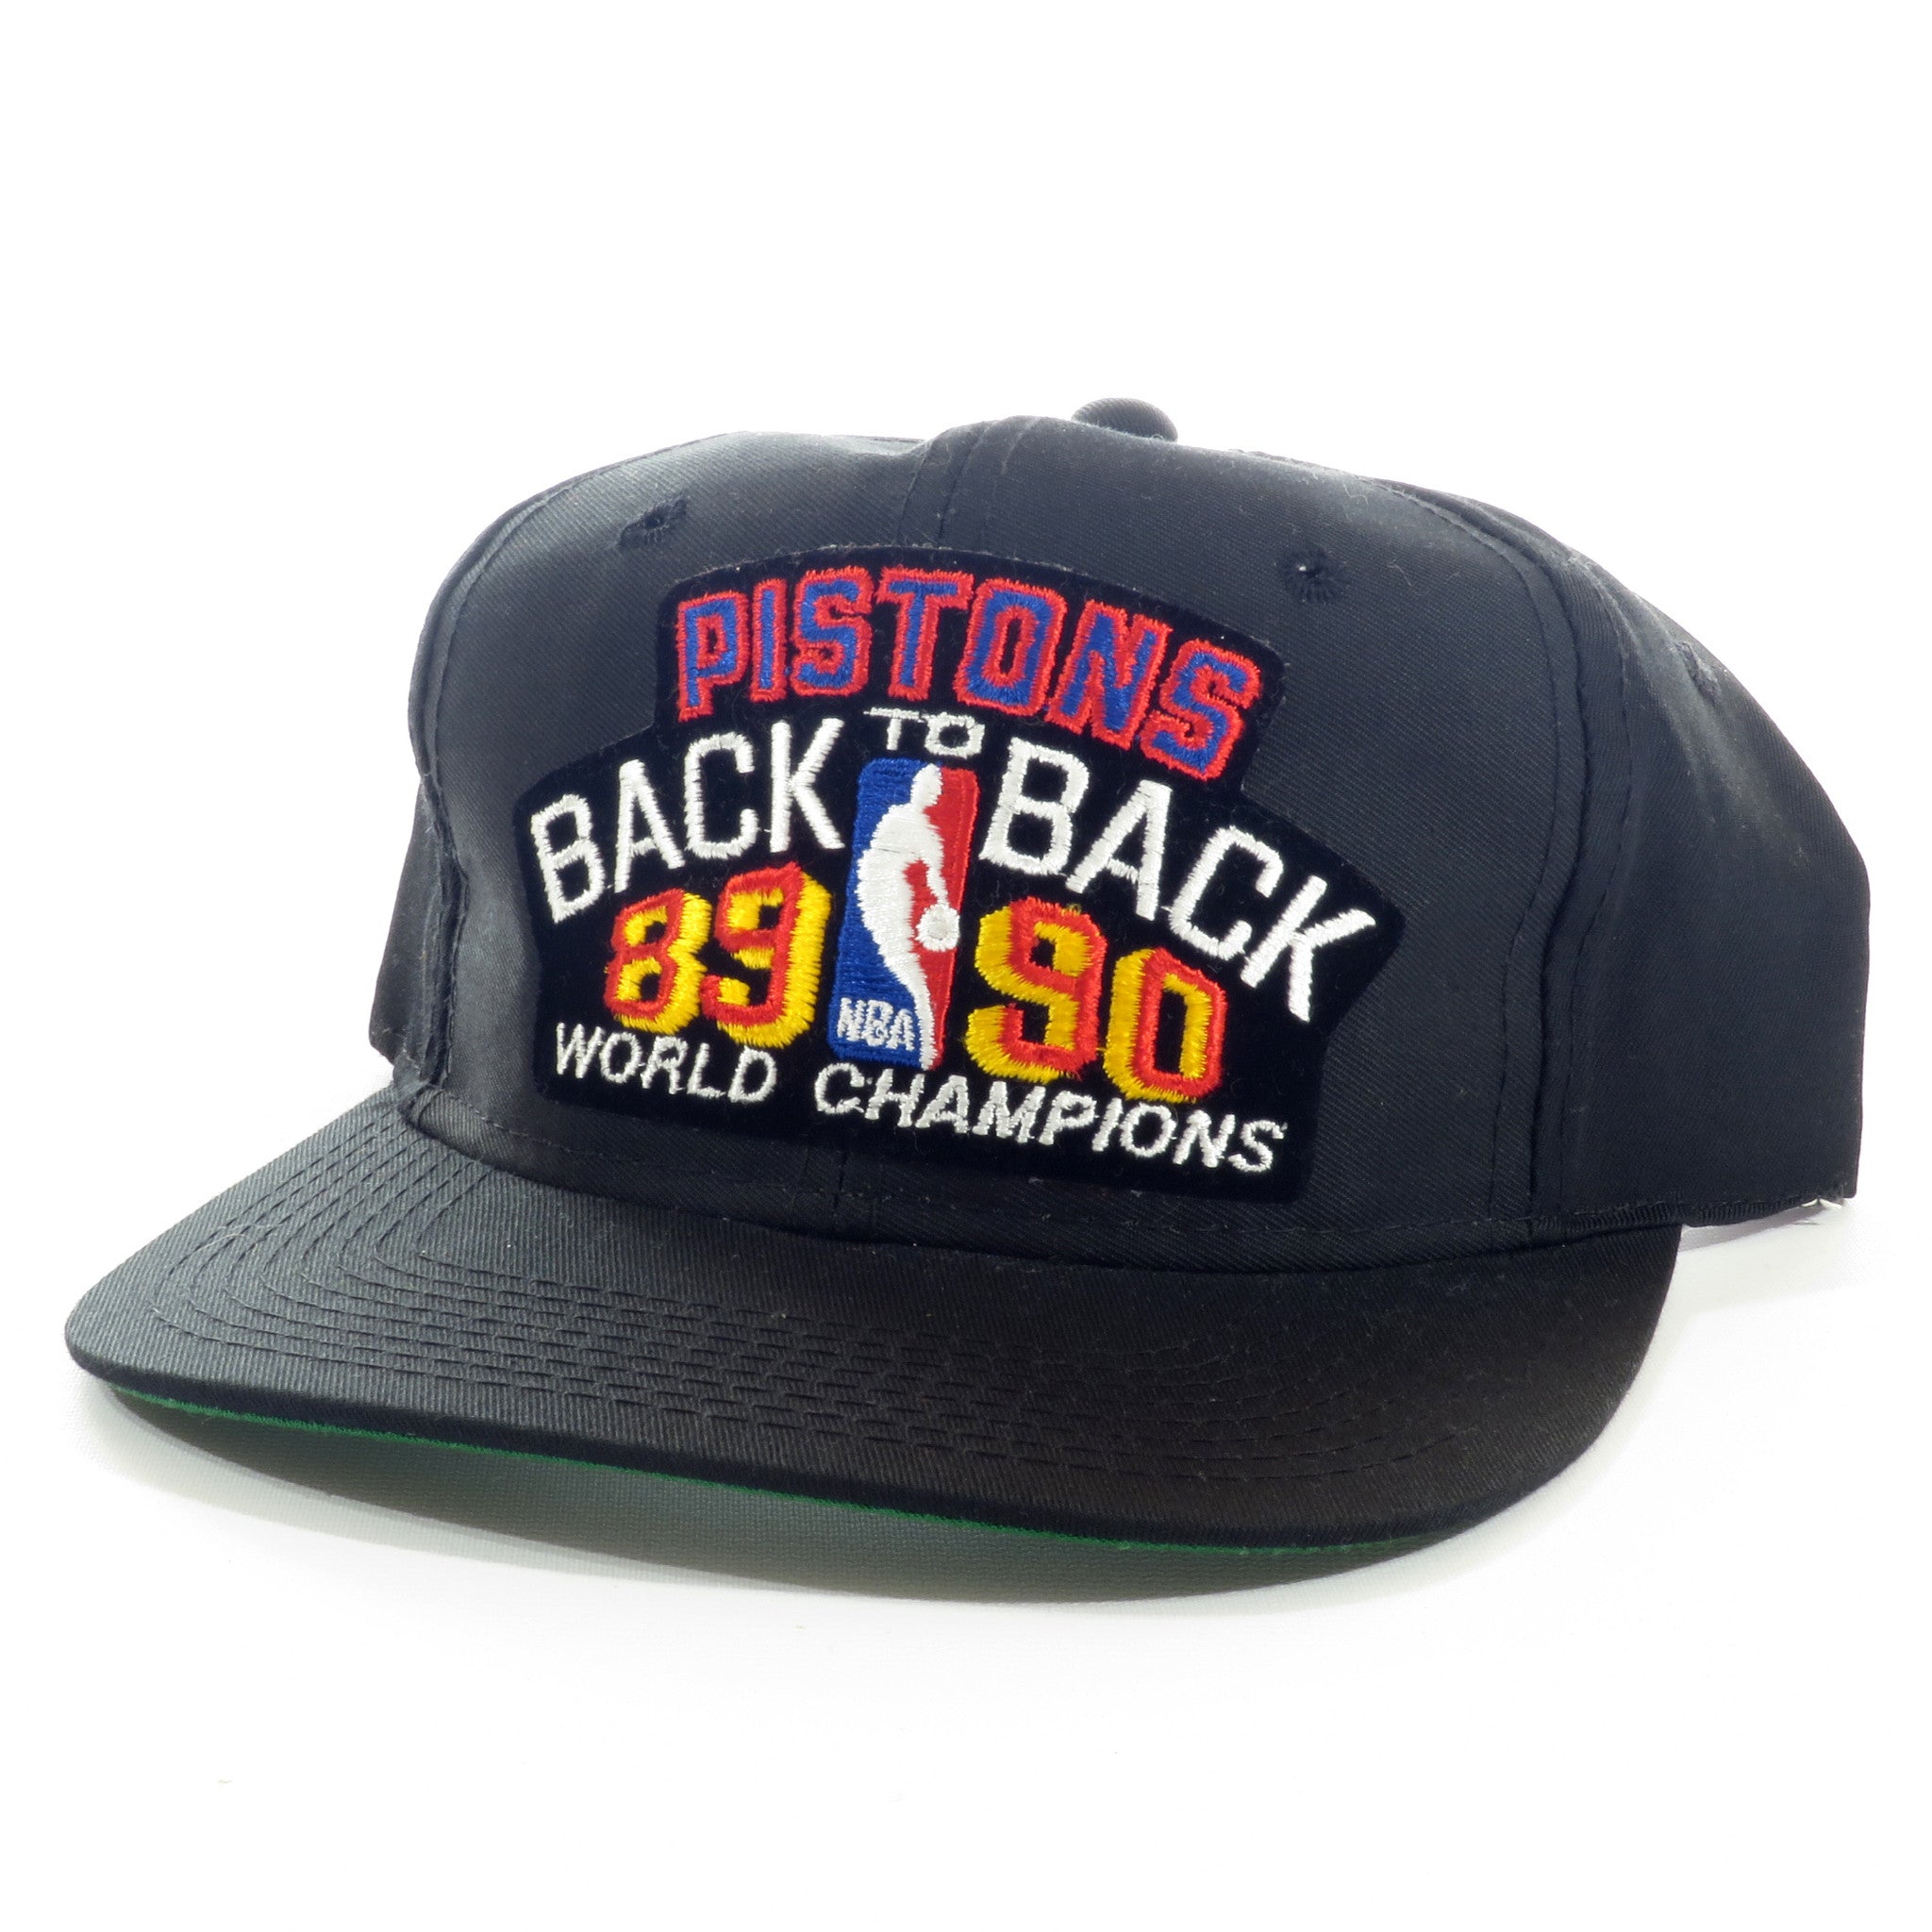 Detroit Pistons Sports Specialties 89-90 Back to Back Champions